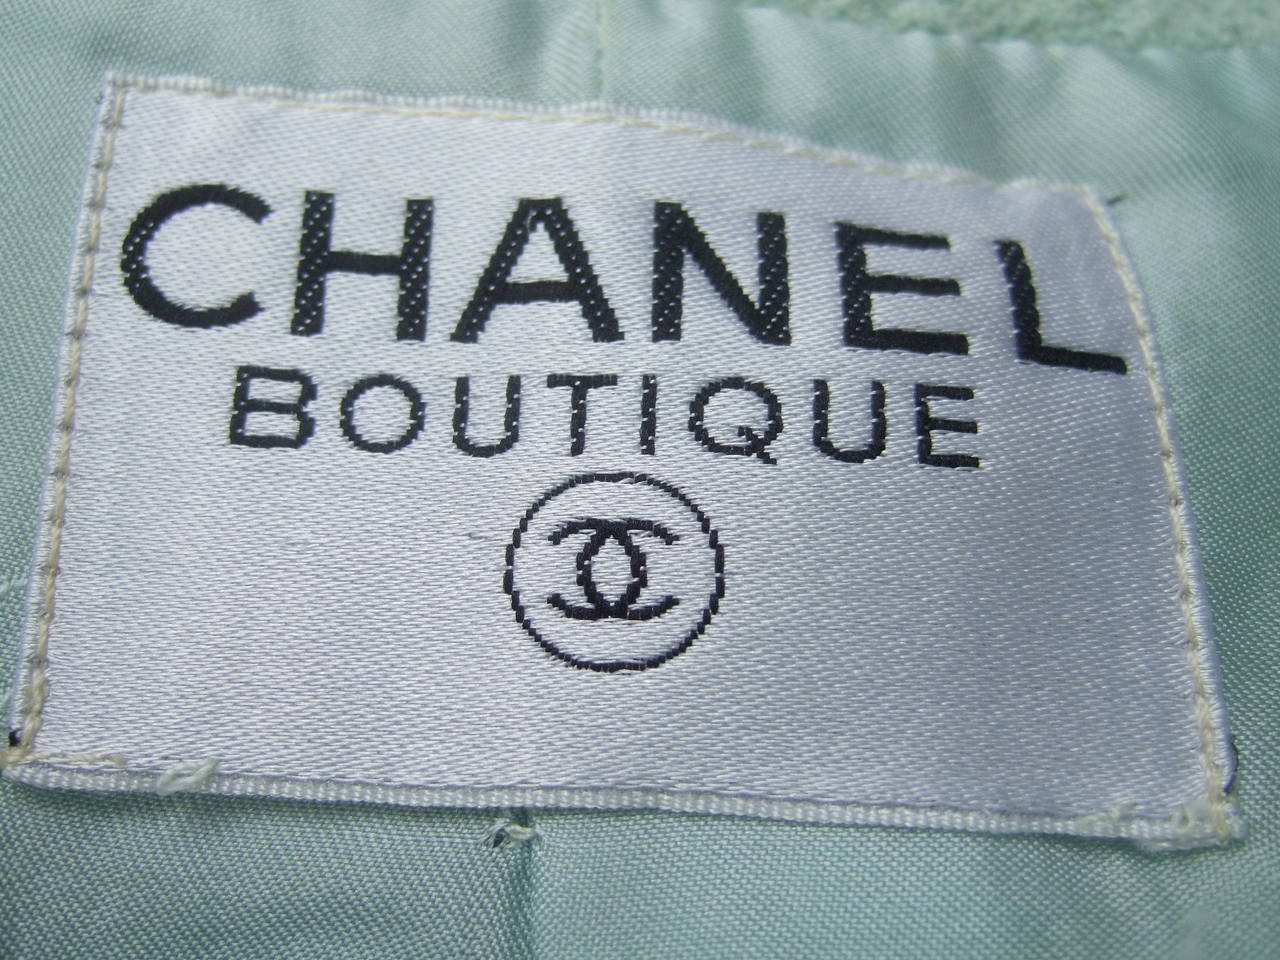 Chanel Boutique Chic Mint Green Wool Skirt Suit  c 1990 1